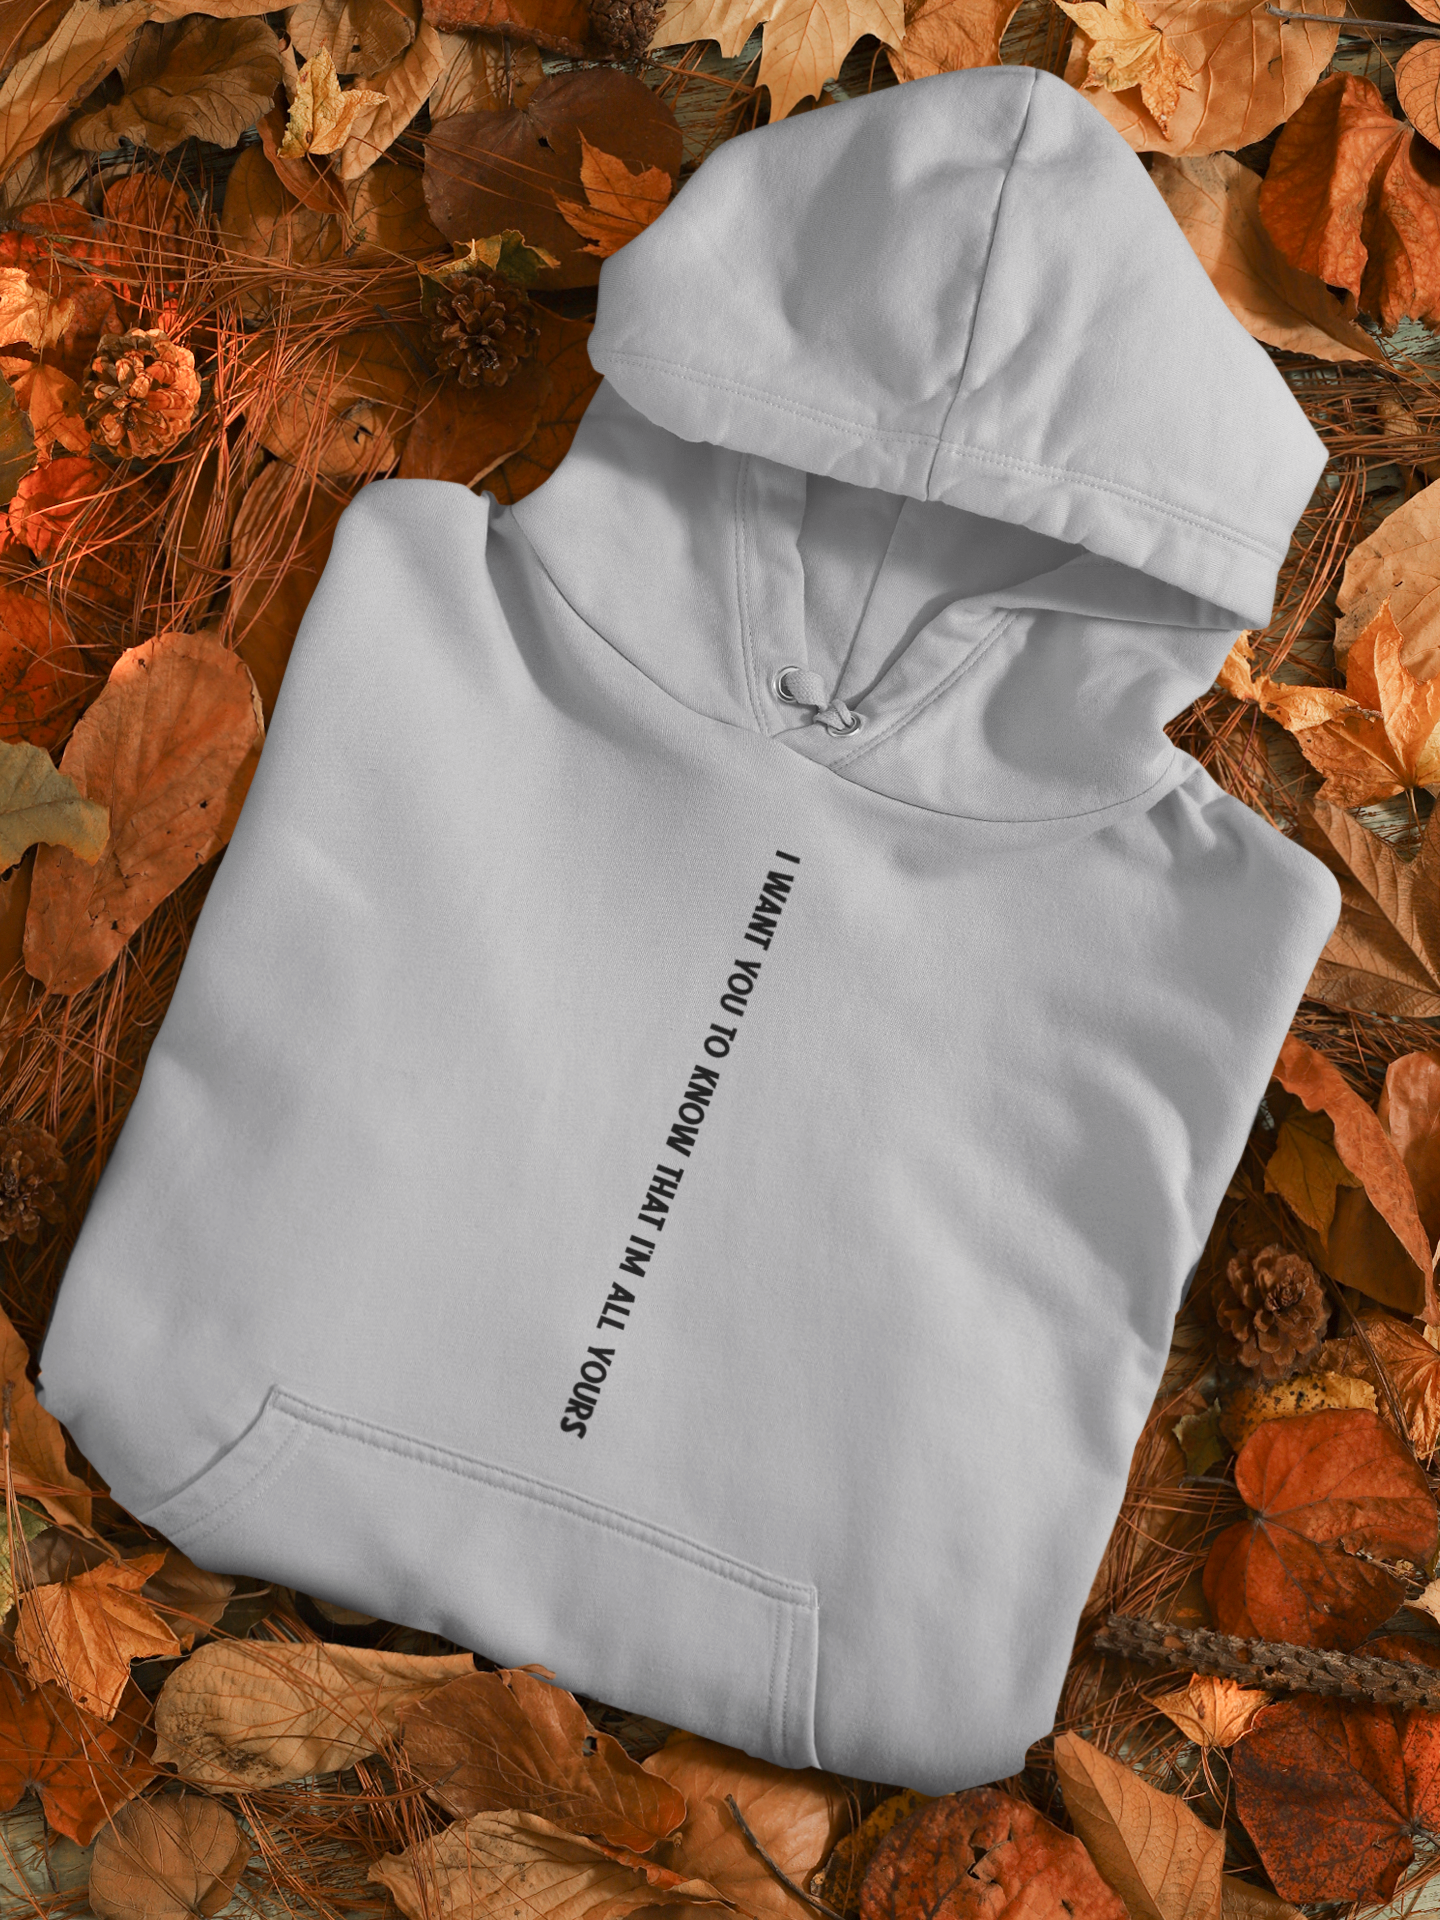 I Want You To Know That I Am All Yours Quotes Hoodies for Women-FunkyTeesClub